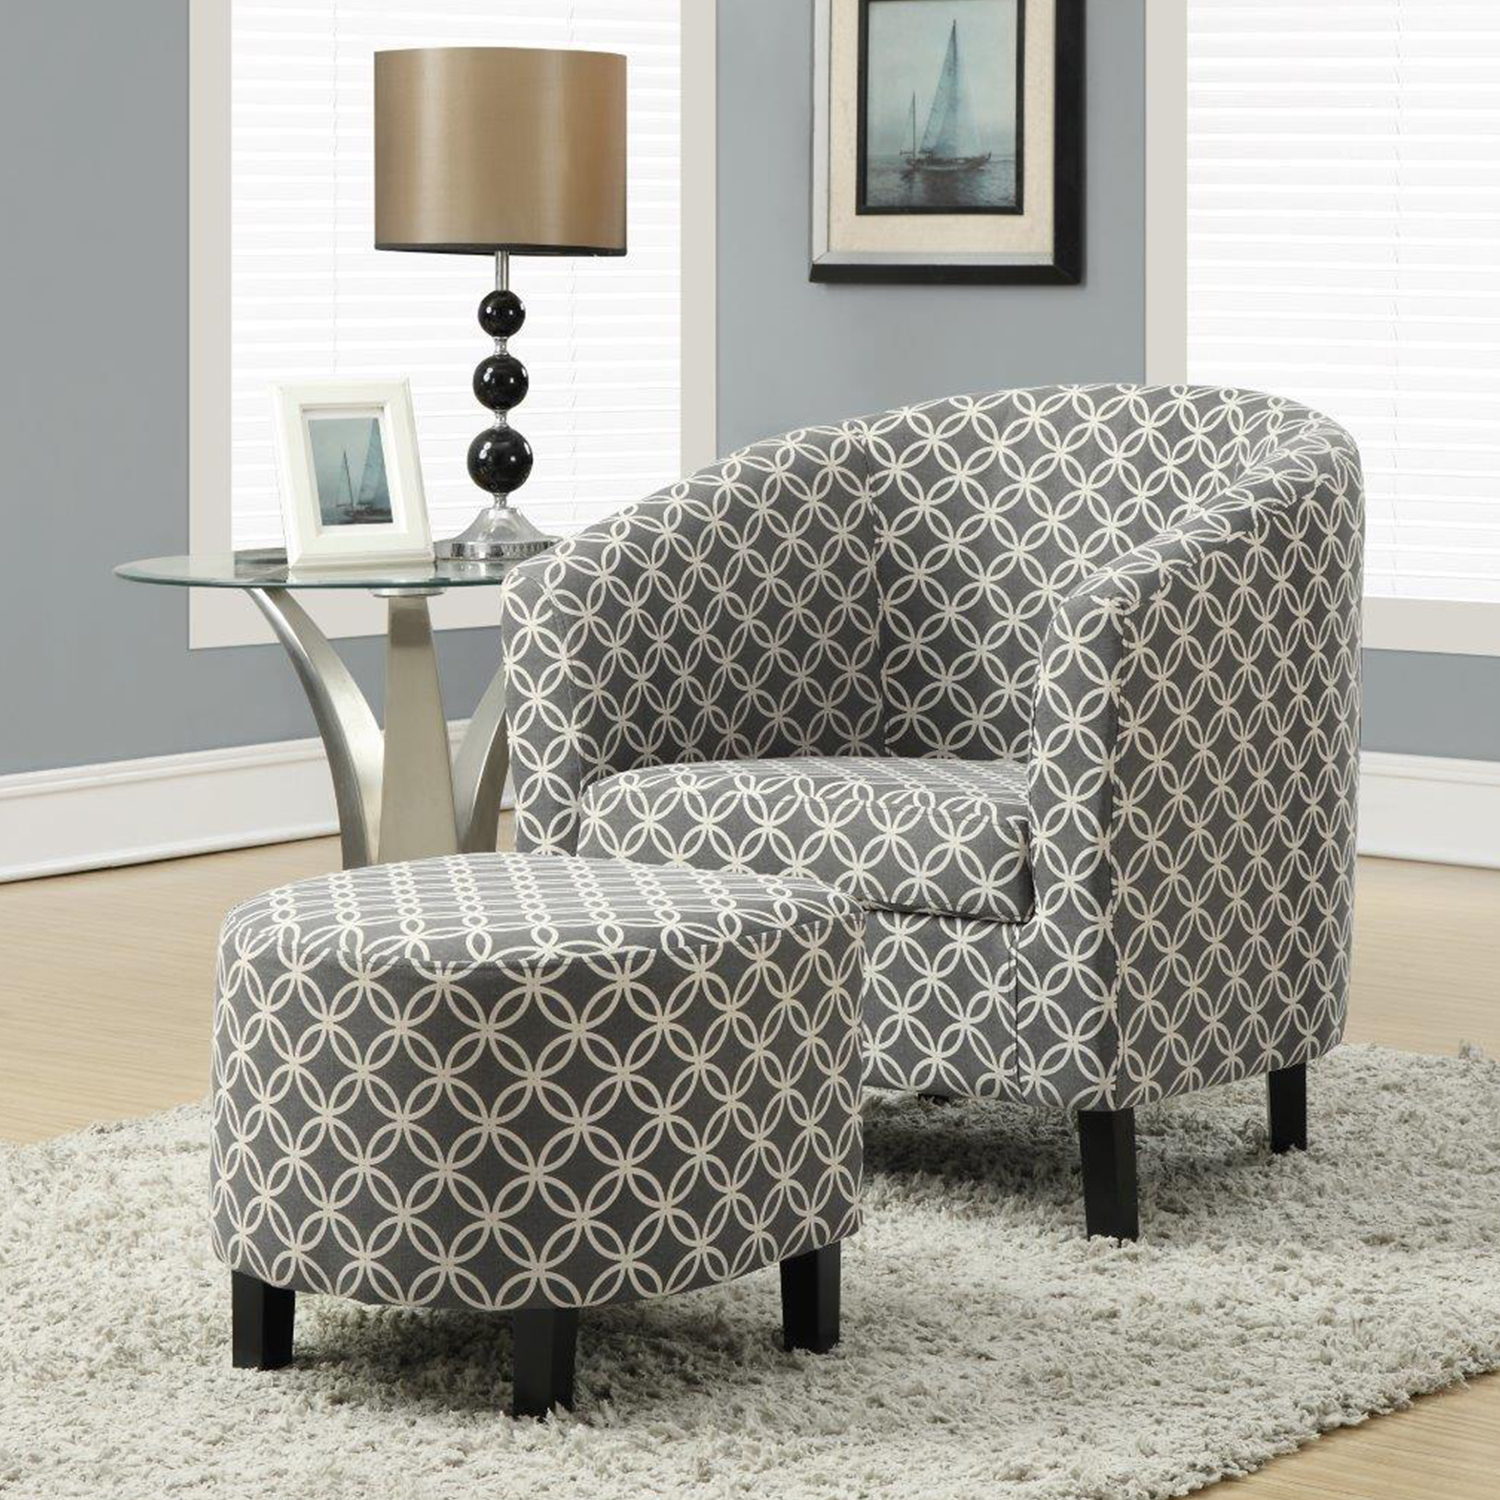 45.5" x 49" x 45.5" Grey Cotton Linen Foam and Black Solid Wood Accent Chair